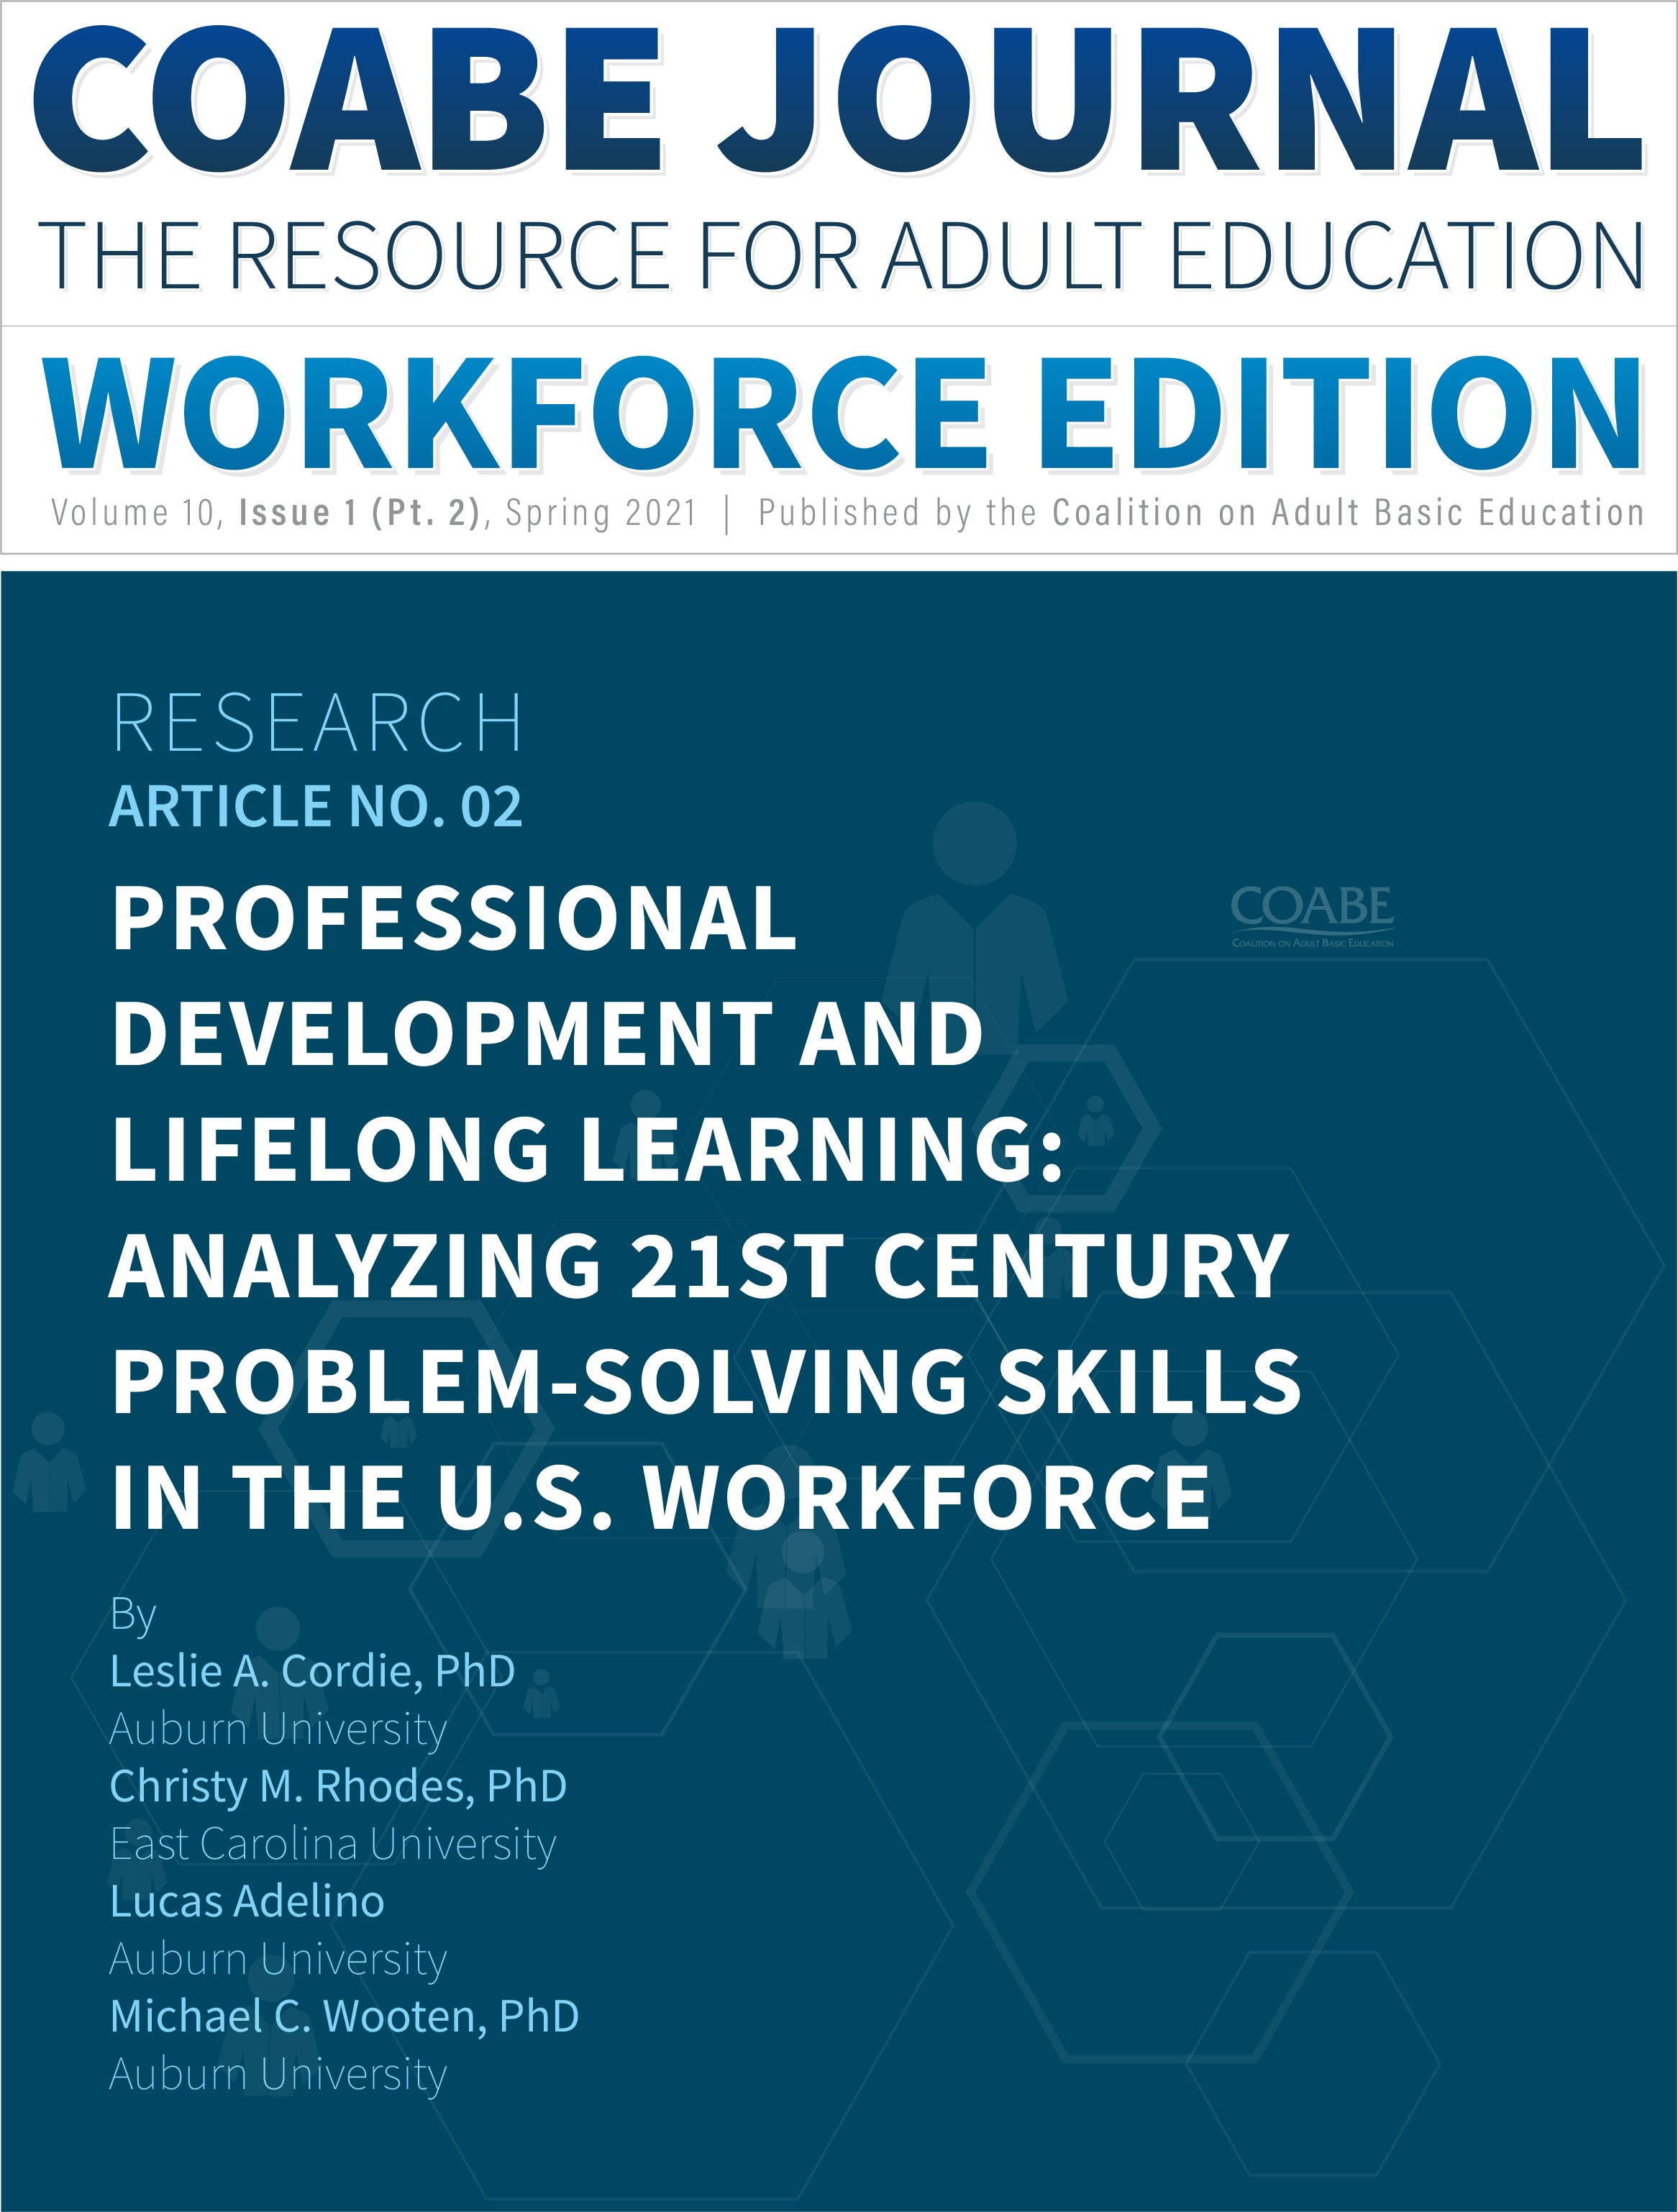 Article 02 :: Professional Development And Lifelong Learning: Analyzing 21st Century Problem-Solving Skills In The U.S. Workforce